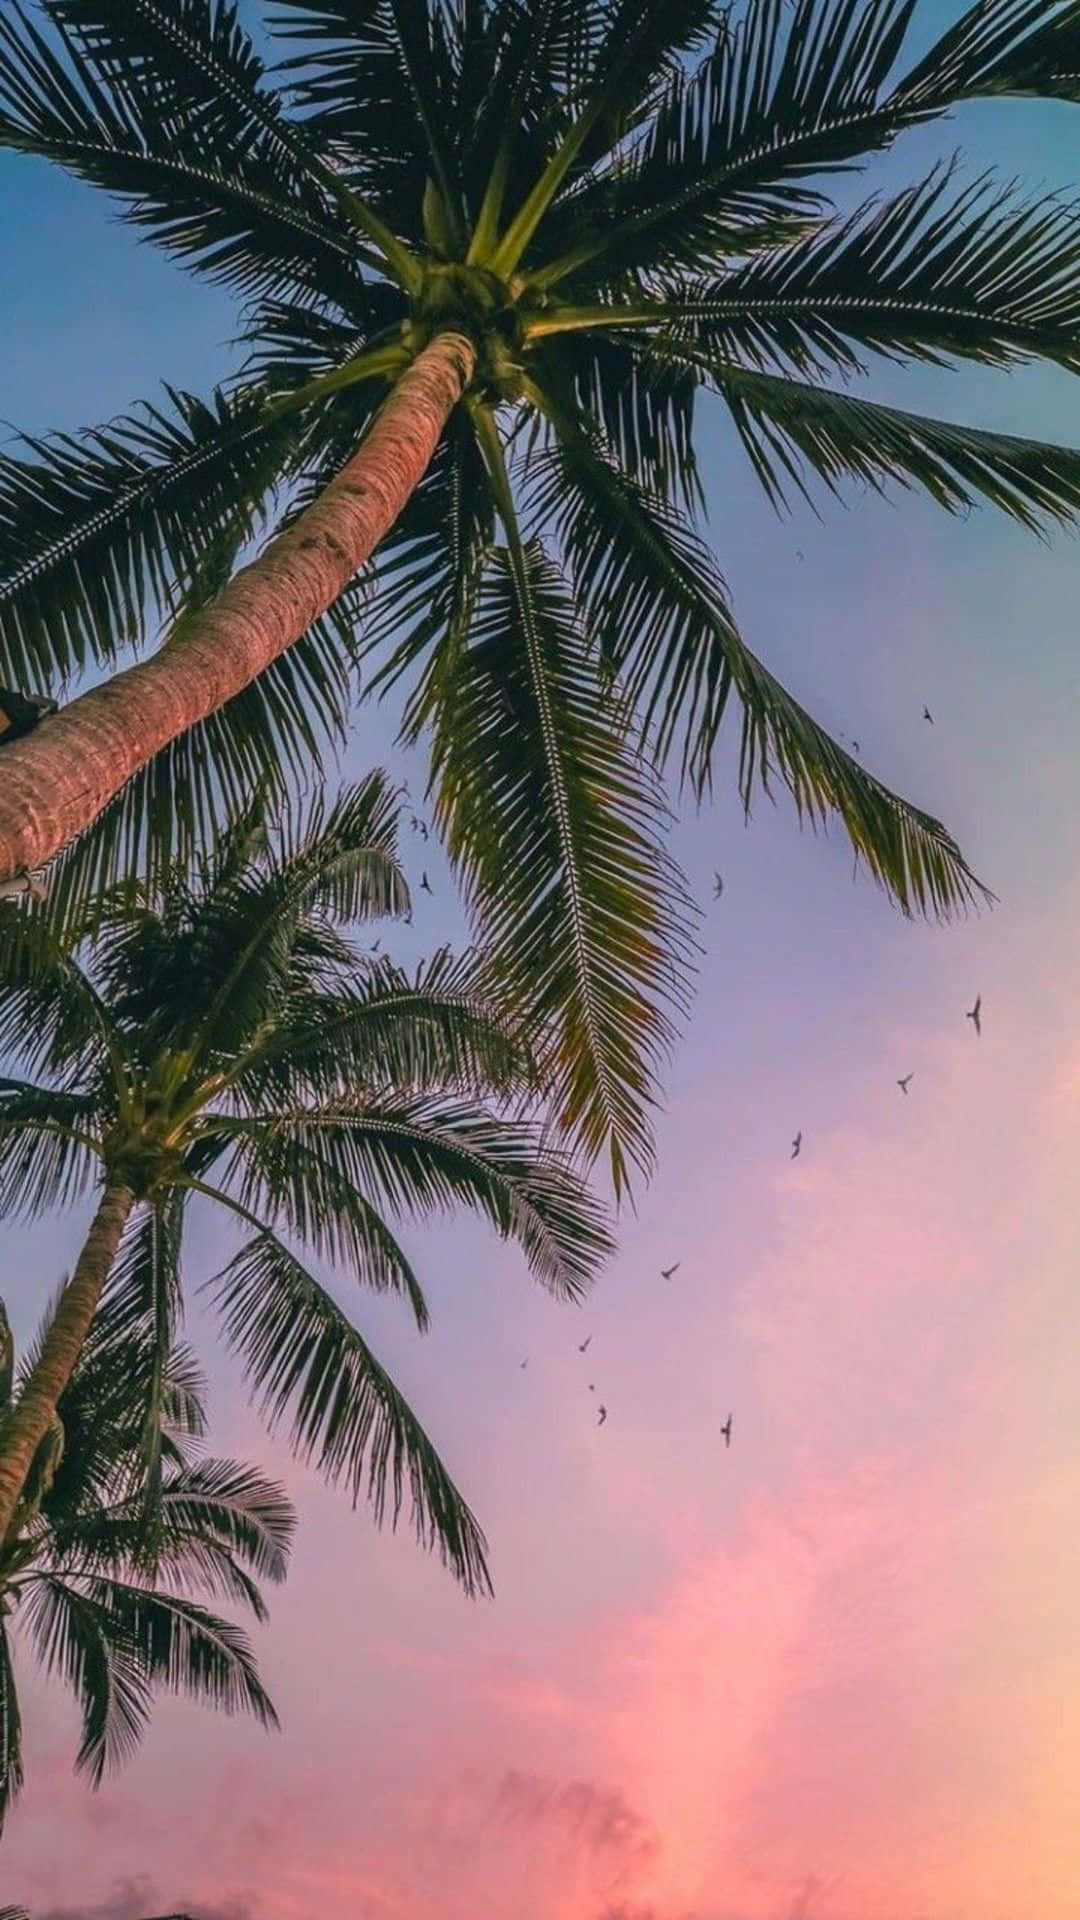 Wallpaper Background Pink Palm Trees Images  Free Photos PNG Stickers  Wallpapers  Backgrounds  rawpixel